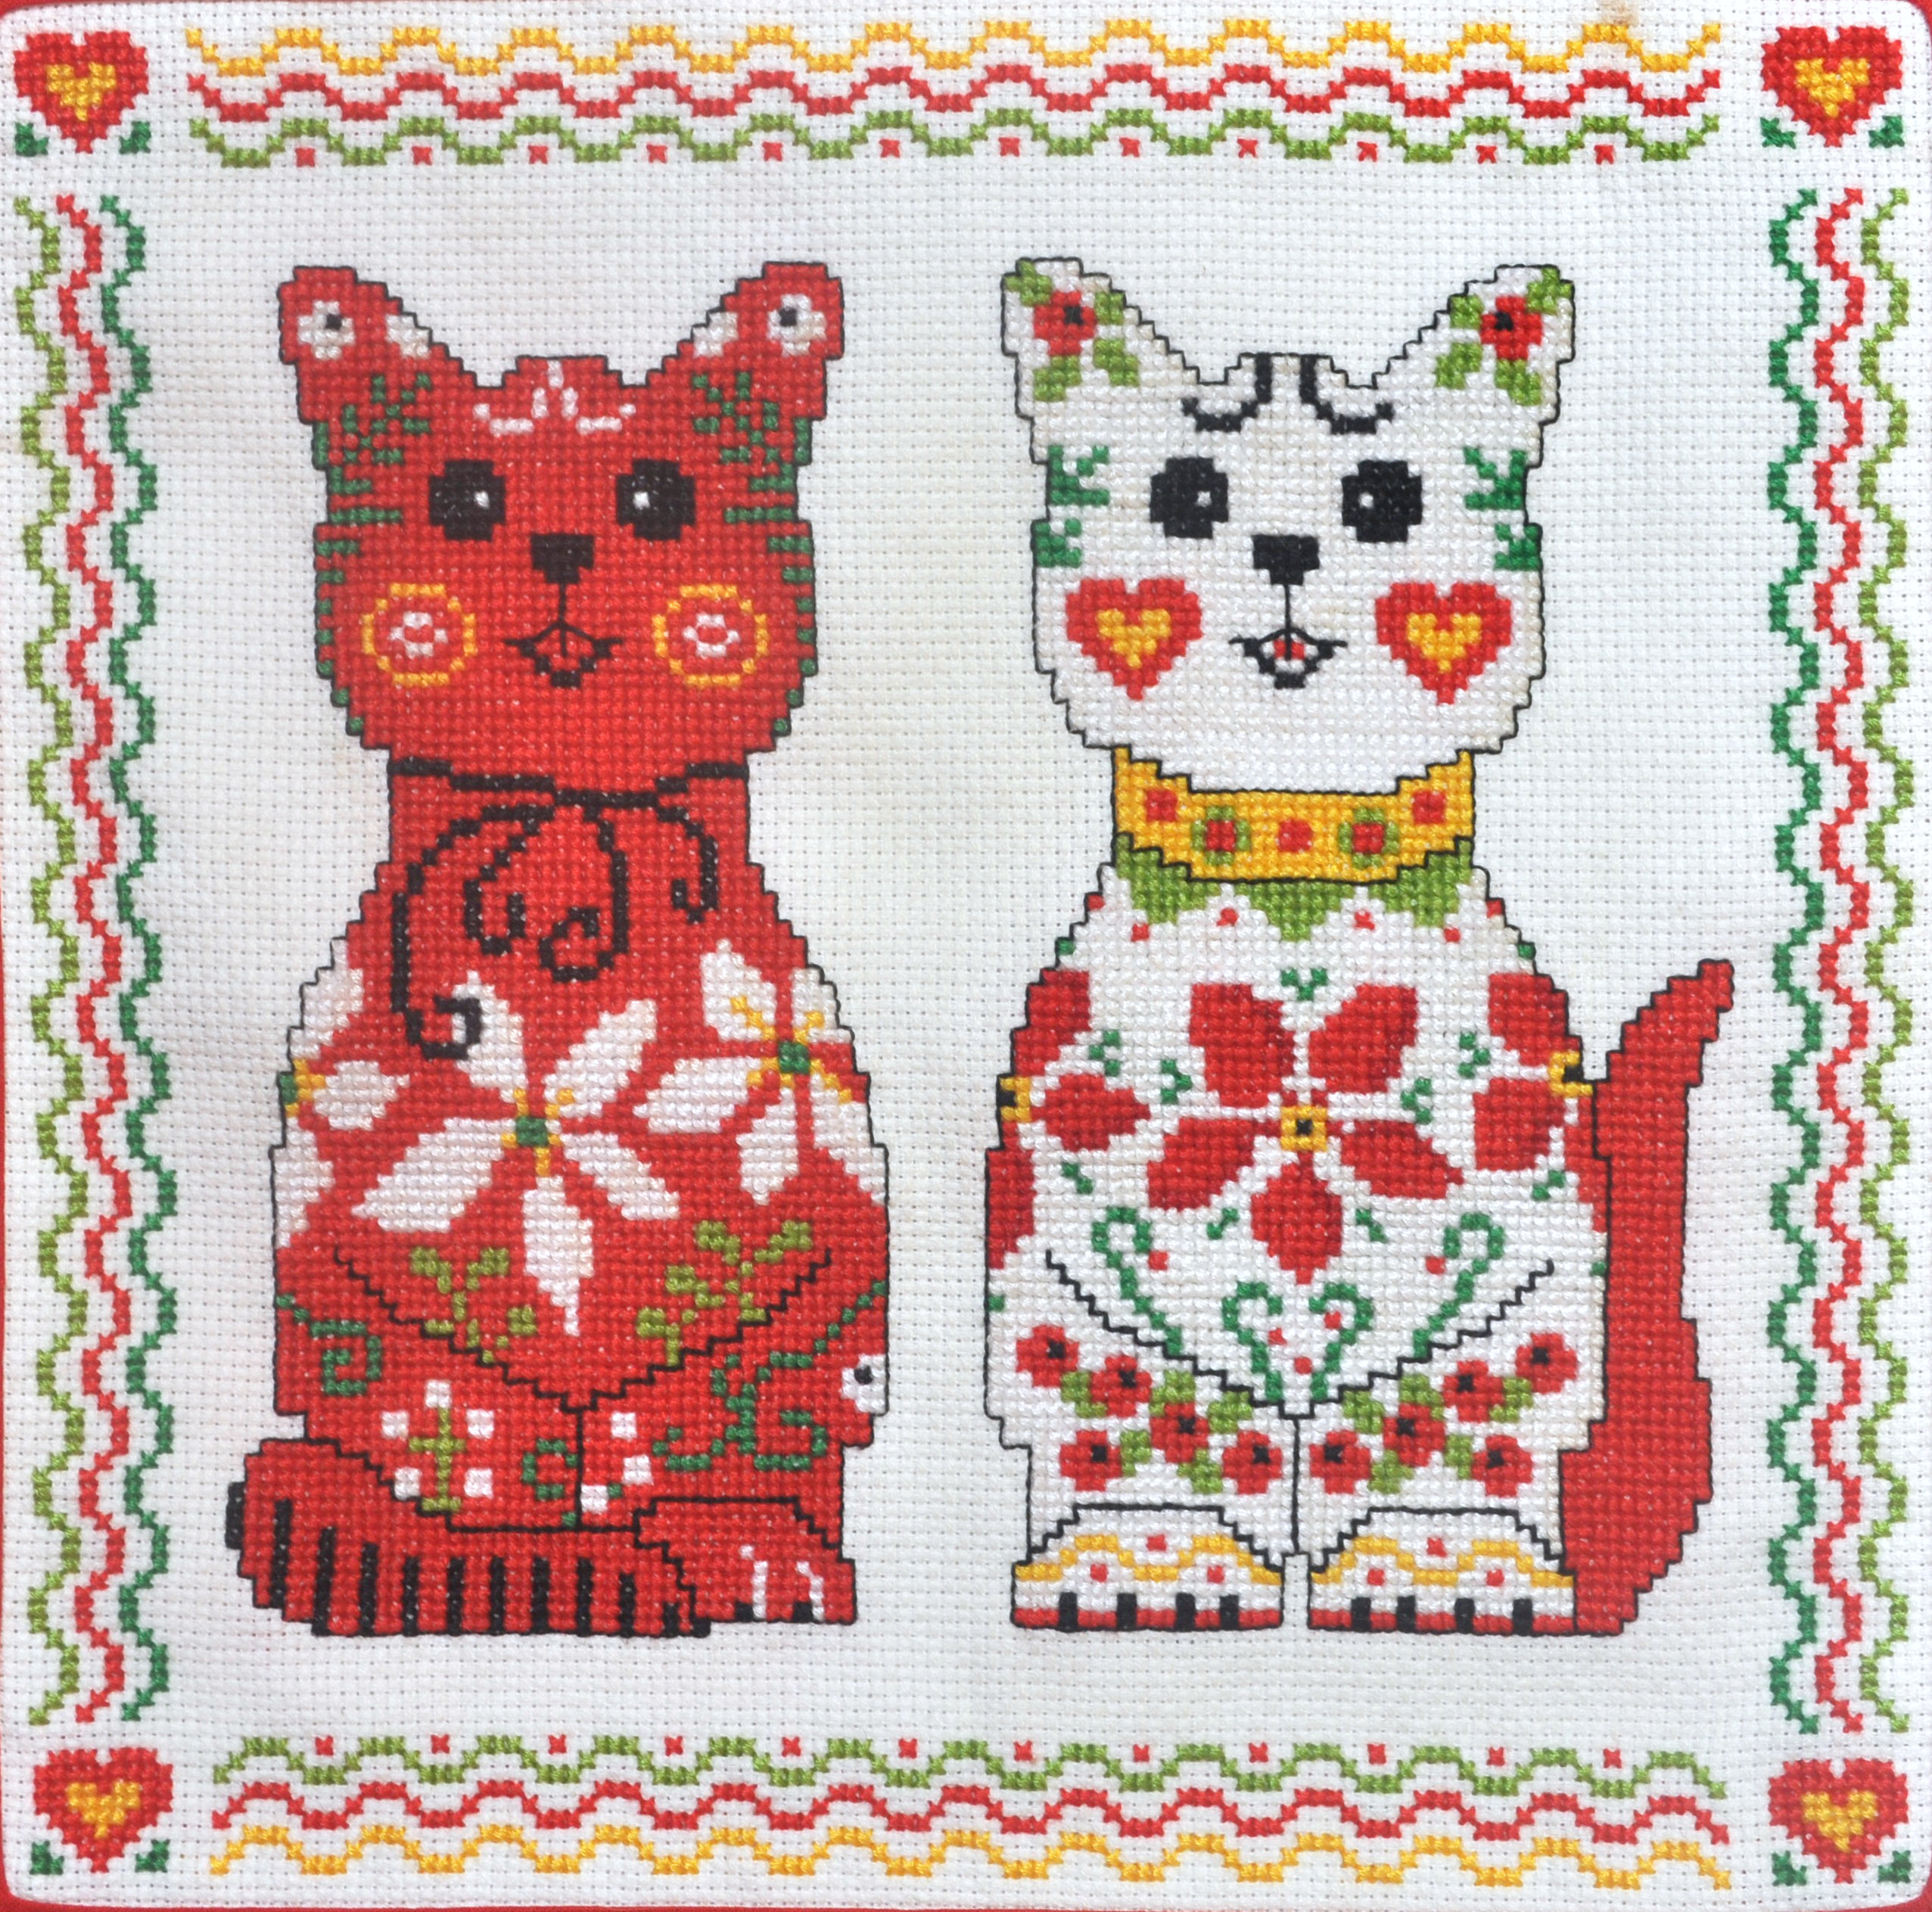  Free Printable Cross Stitch Patterns Of Cats PRINTABLE TEMPLATES